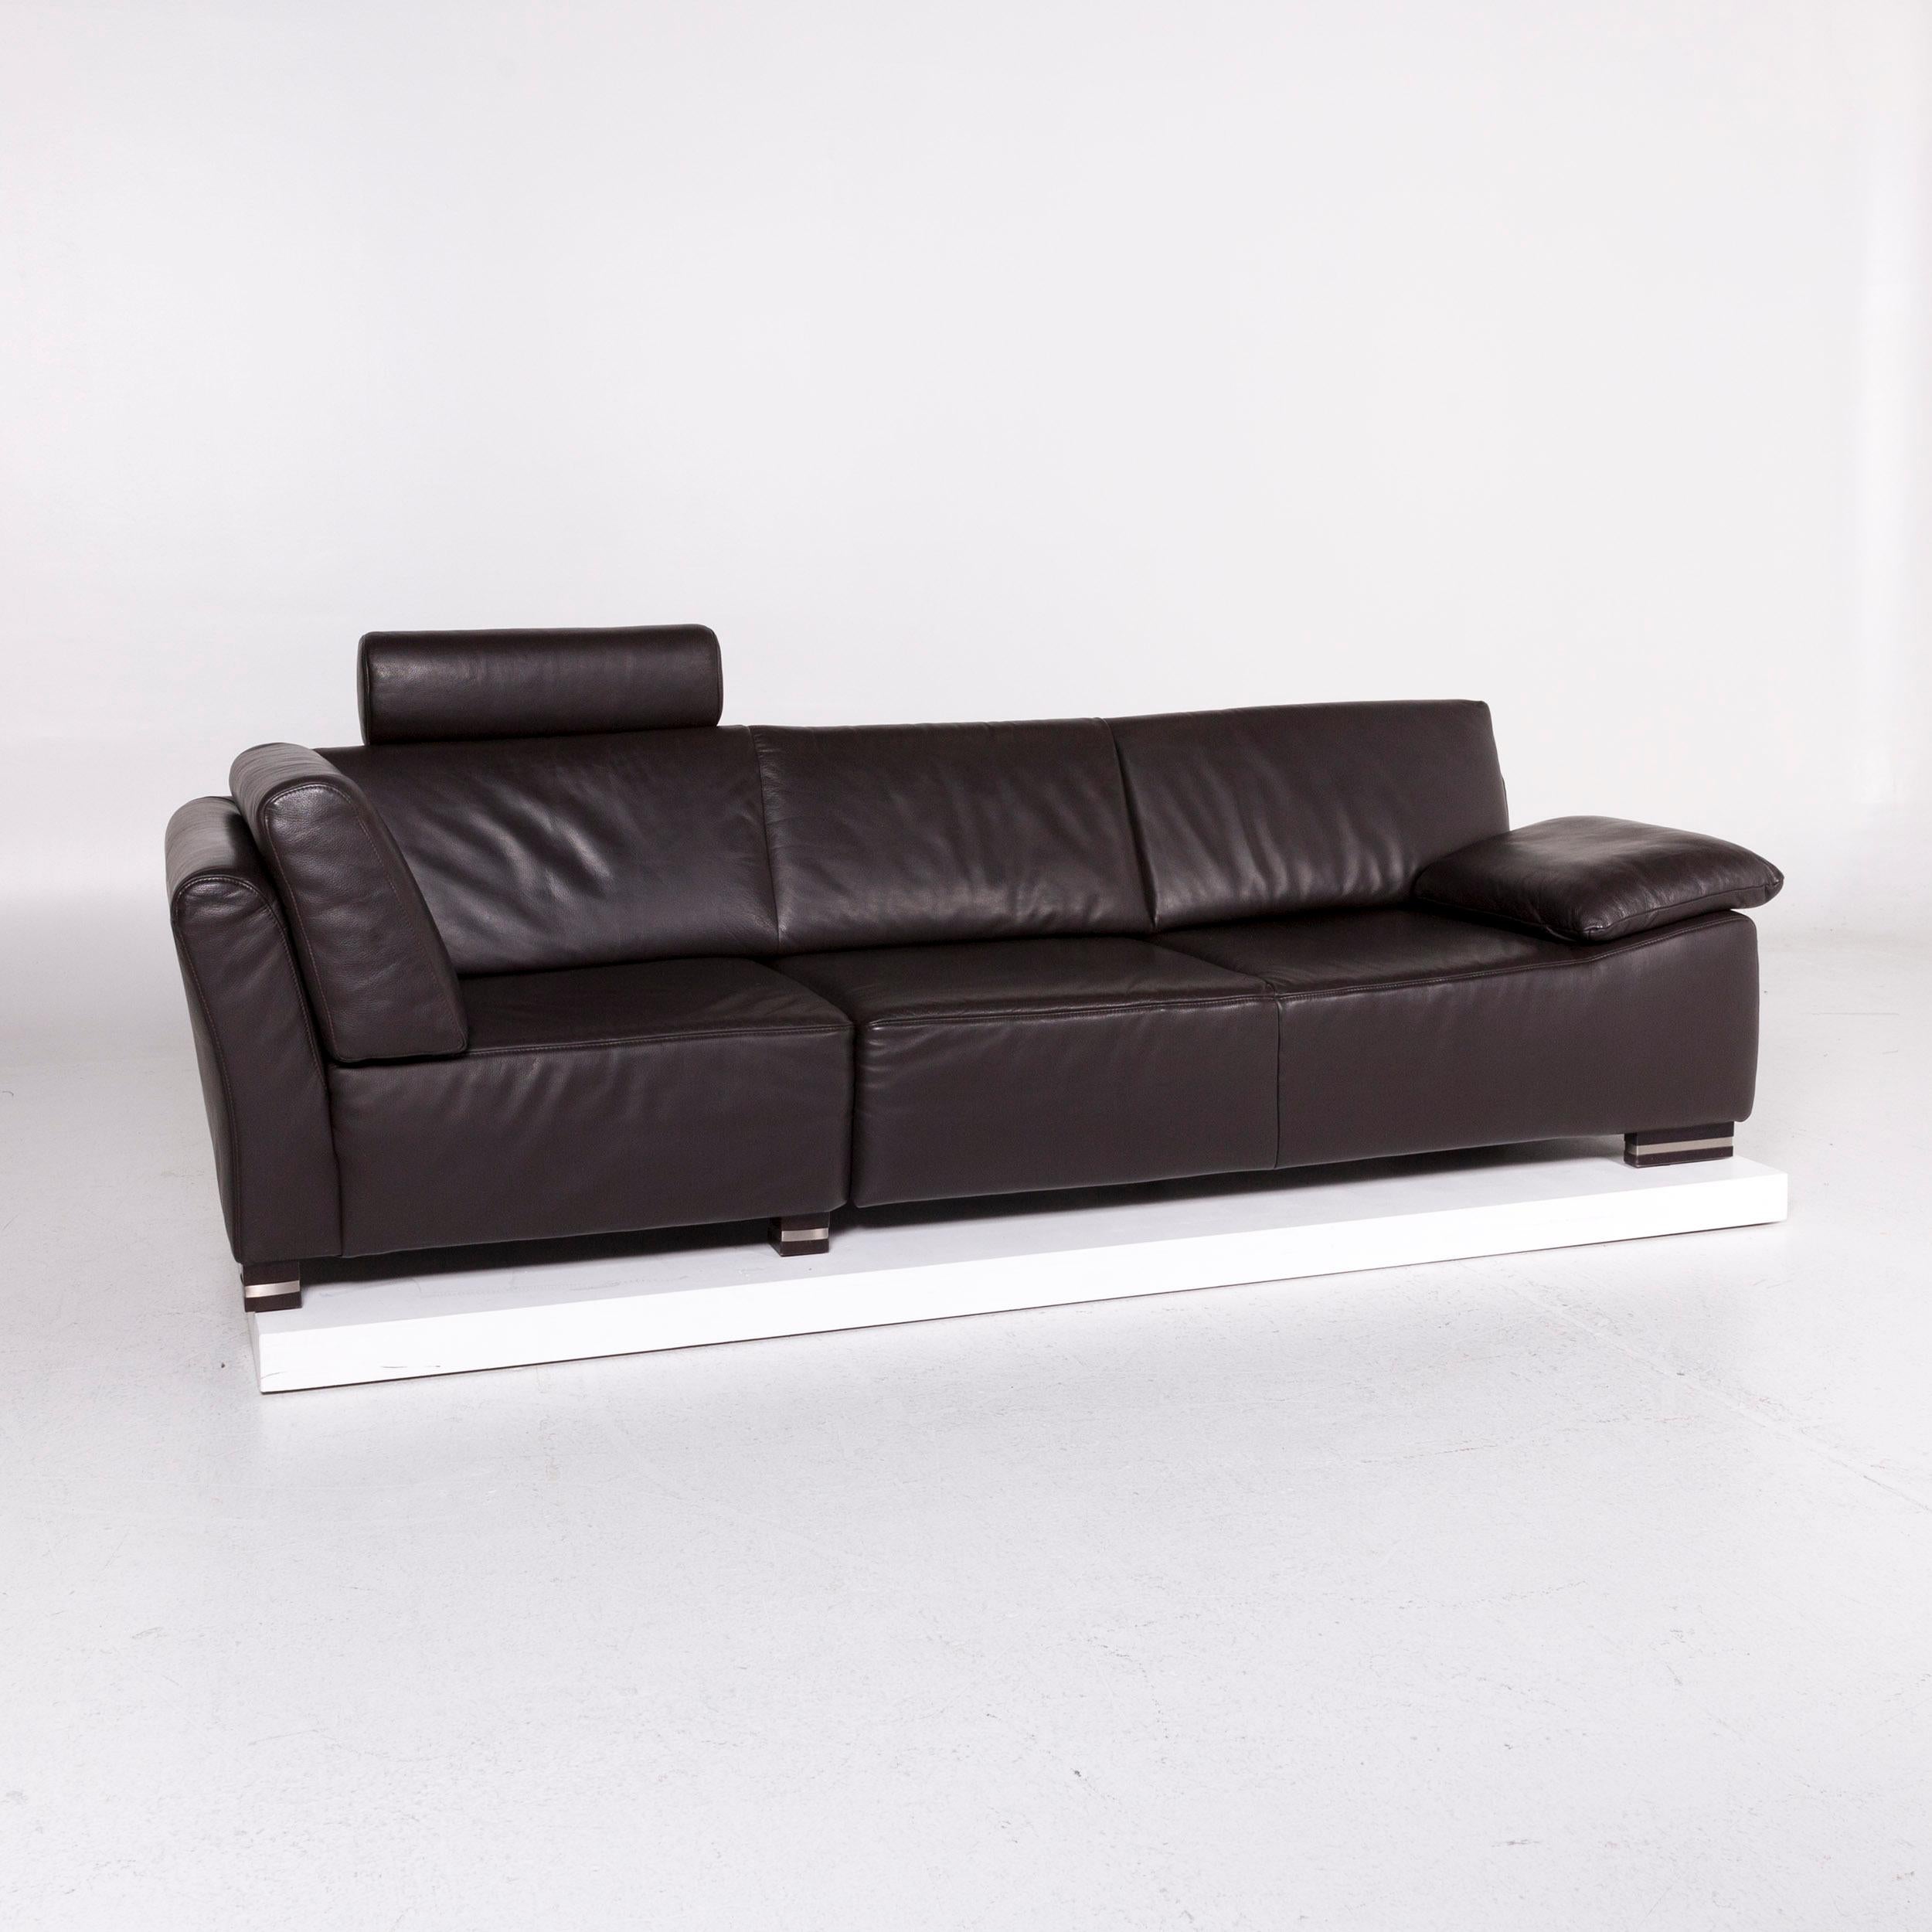 We bring to you an Ewald Schillig Bentley leather sofa brown three-seat couch.
 
Product measurements in centimeters:
 
Depth 96
Width 264
Height 75
Seat-height 38
Rest-height 54
Seat-depth 56
Seat-width 183
Back-height 37.


  